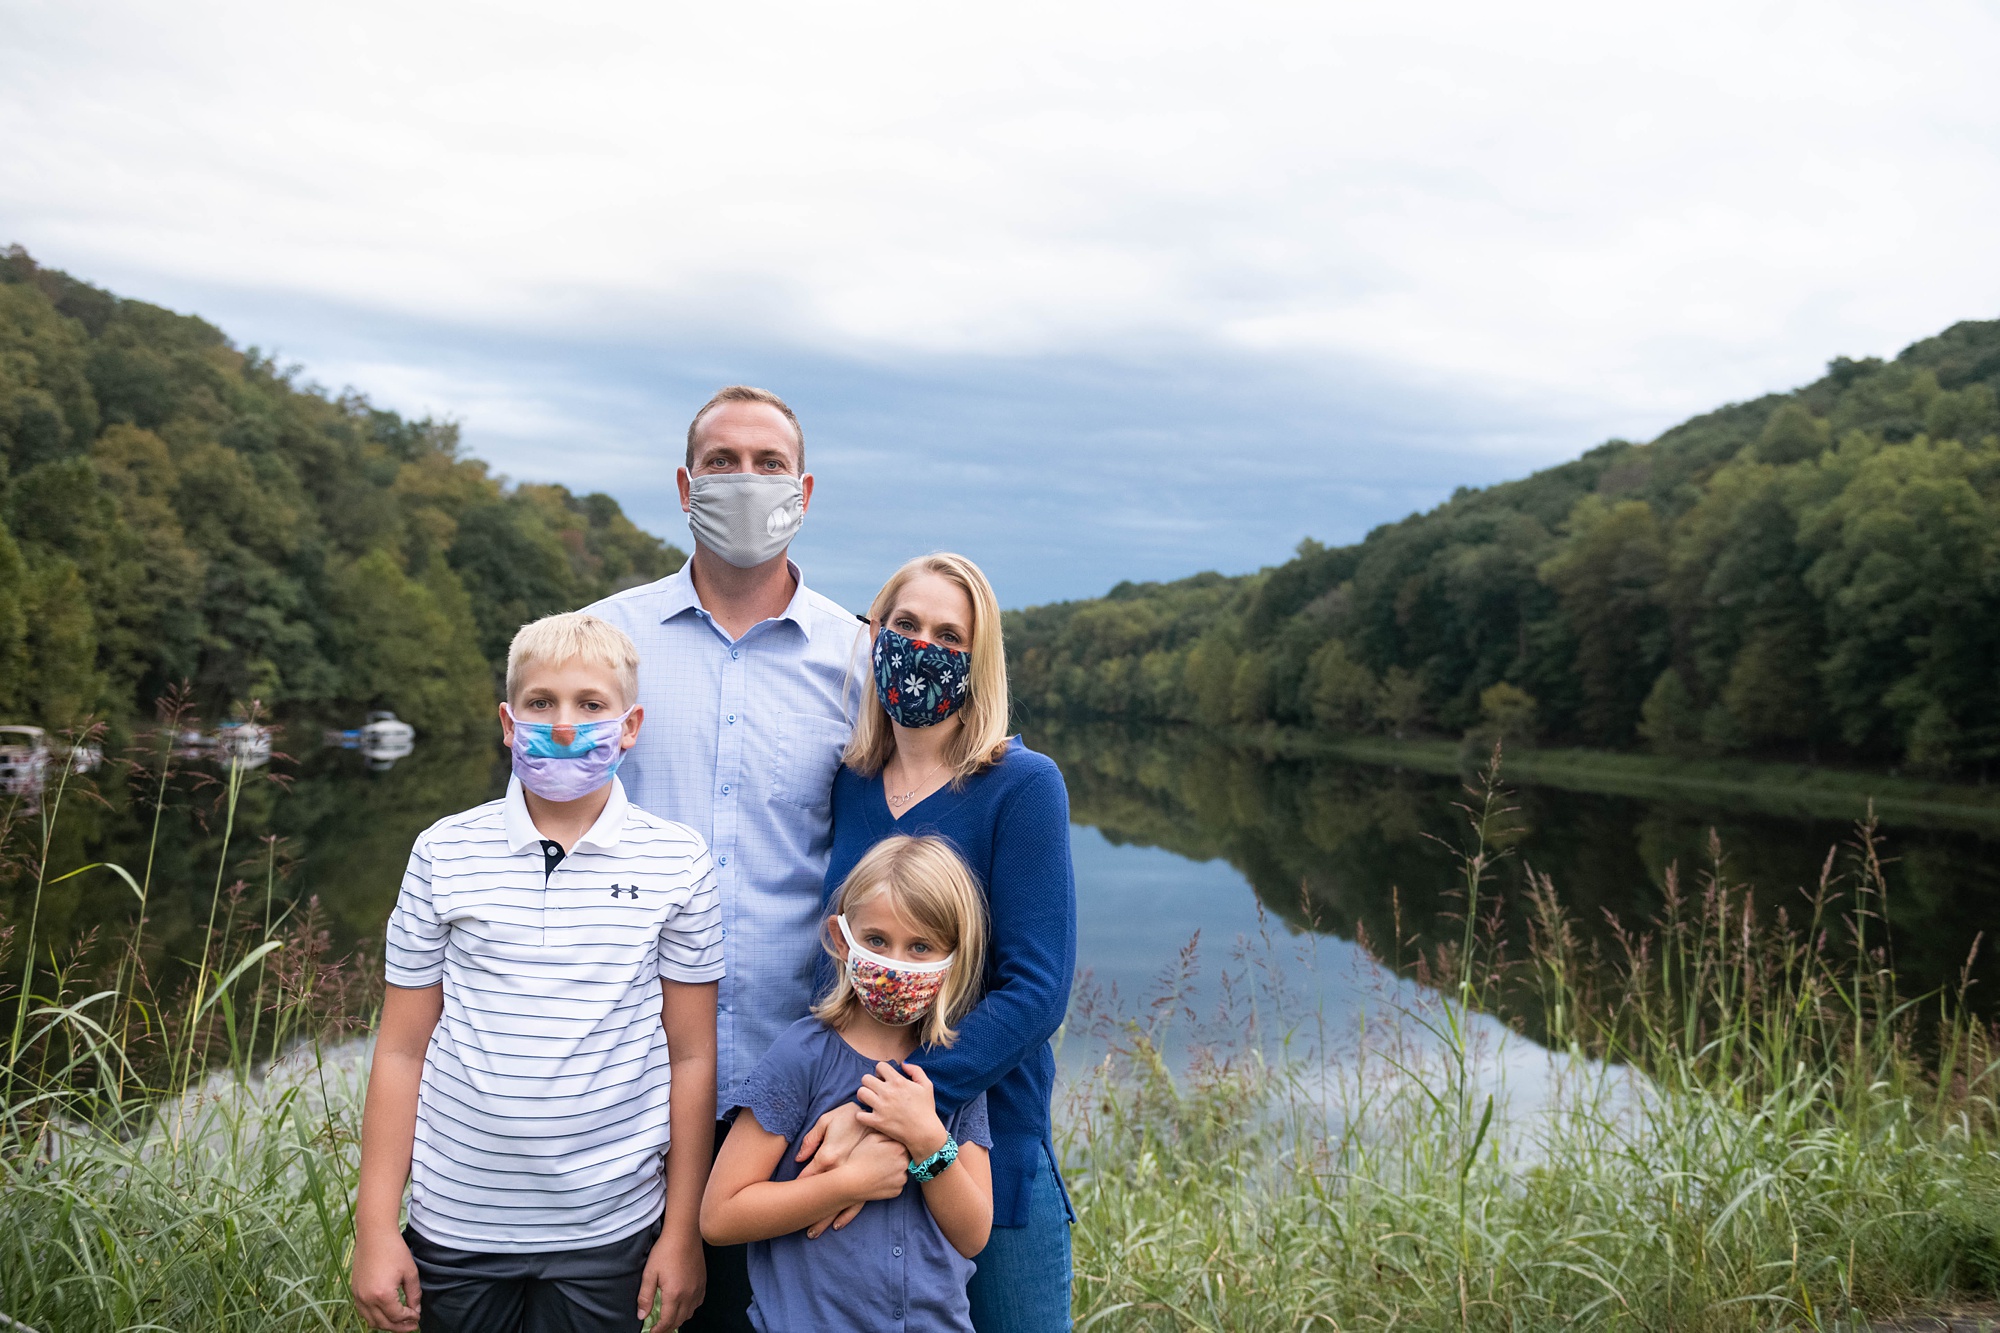 Maryland family poses with masks during Photo Session in Lake Linganore